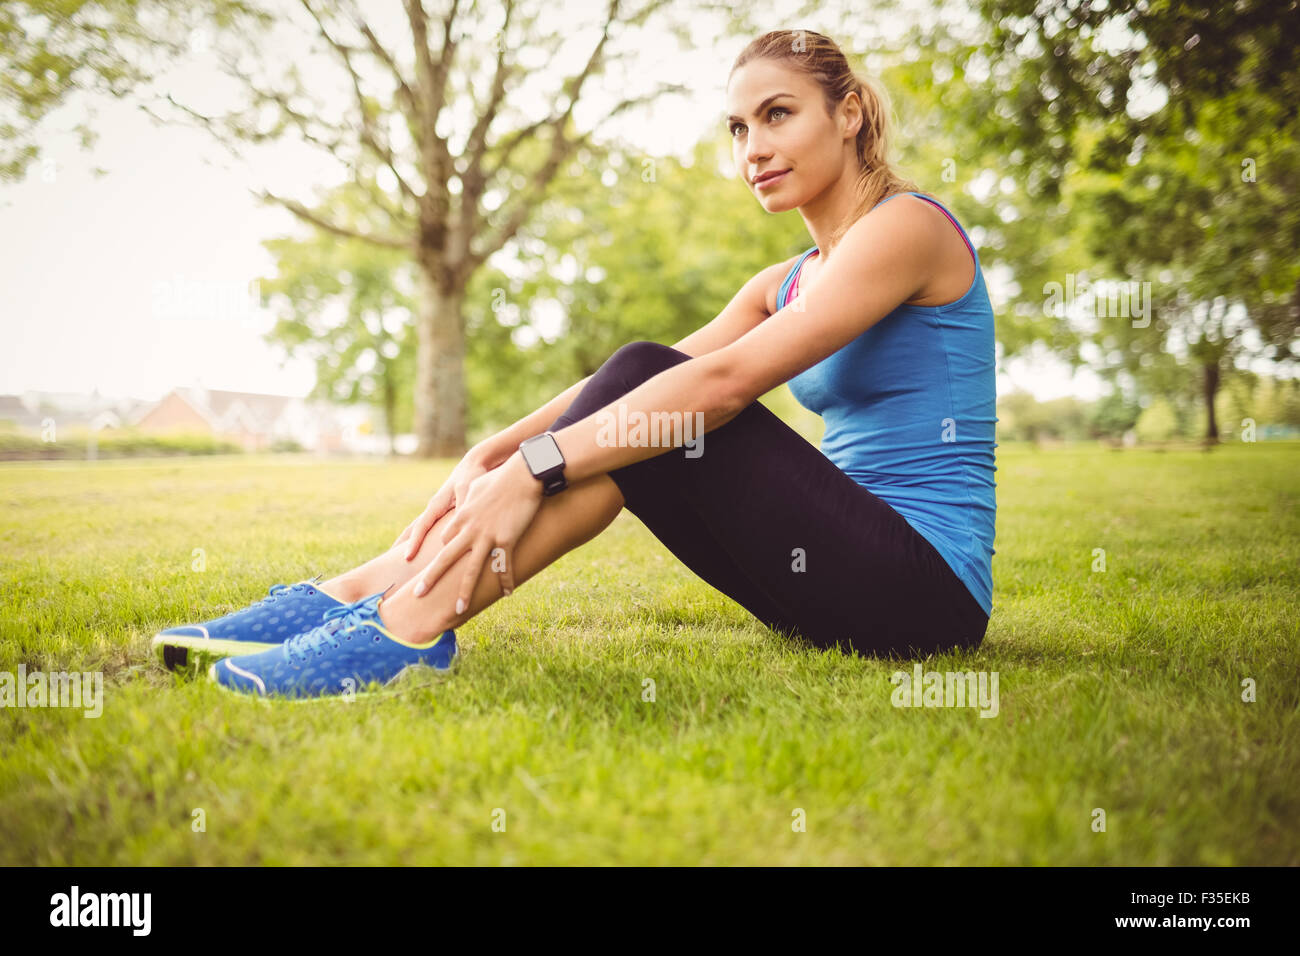 Full length of woman exercising with crossed legs Stock Photo